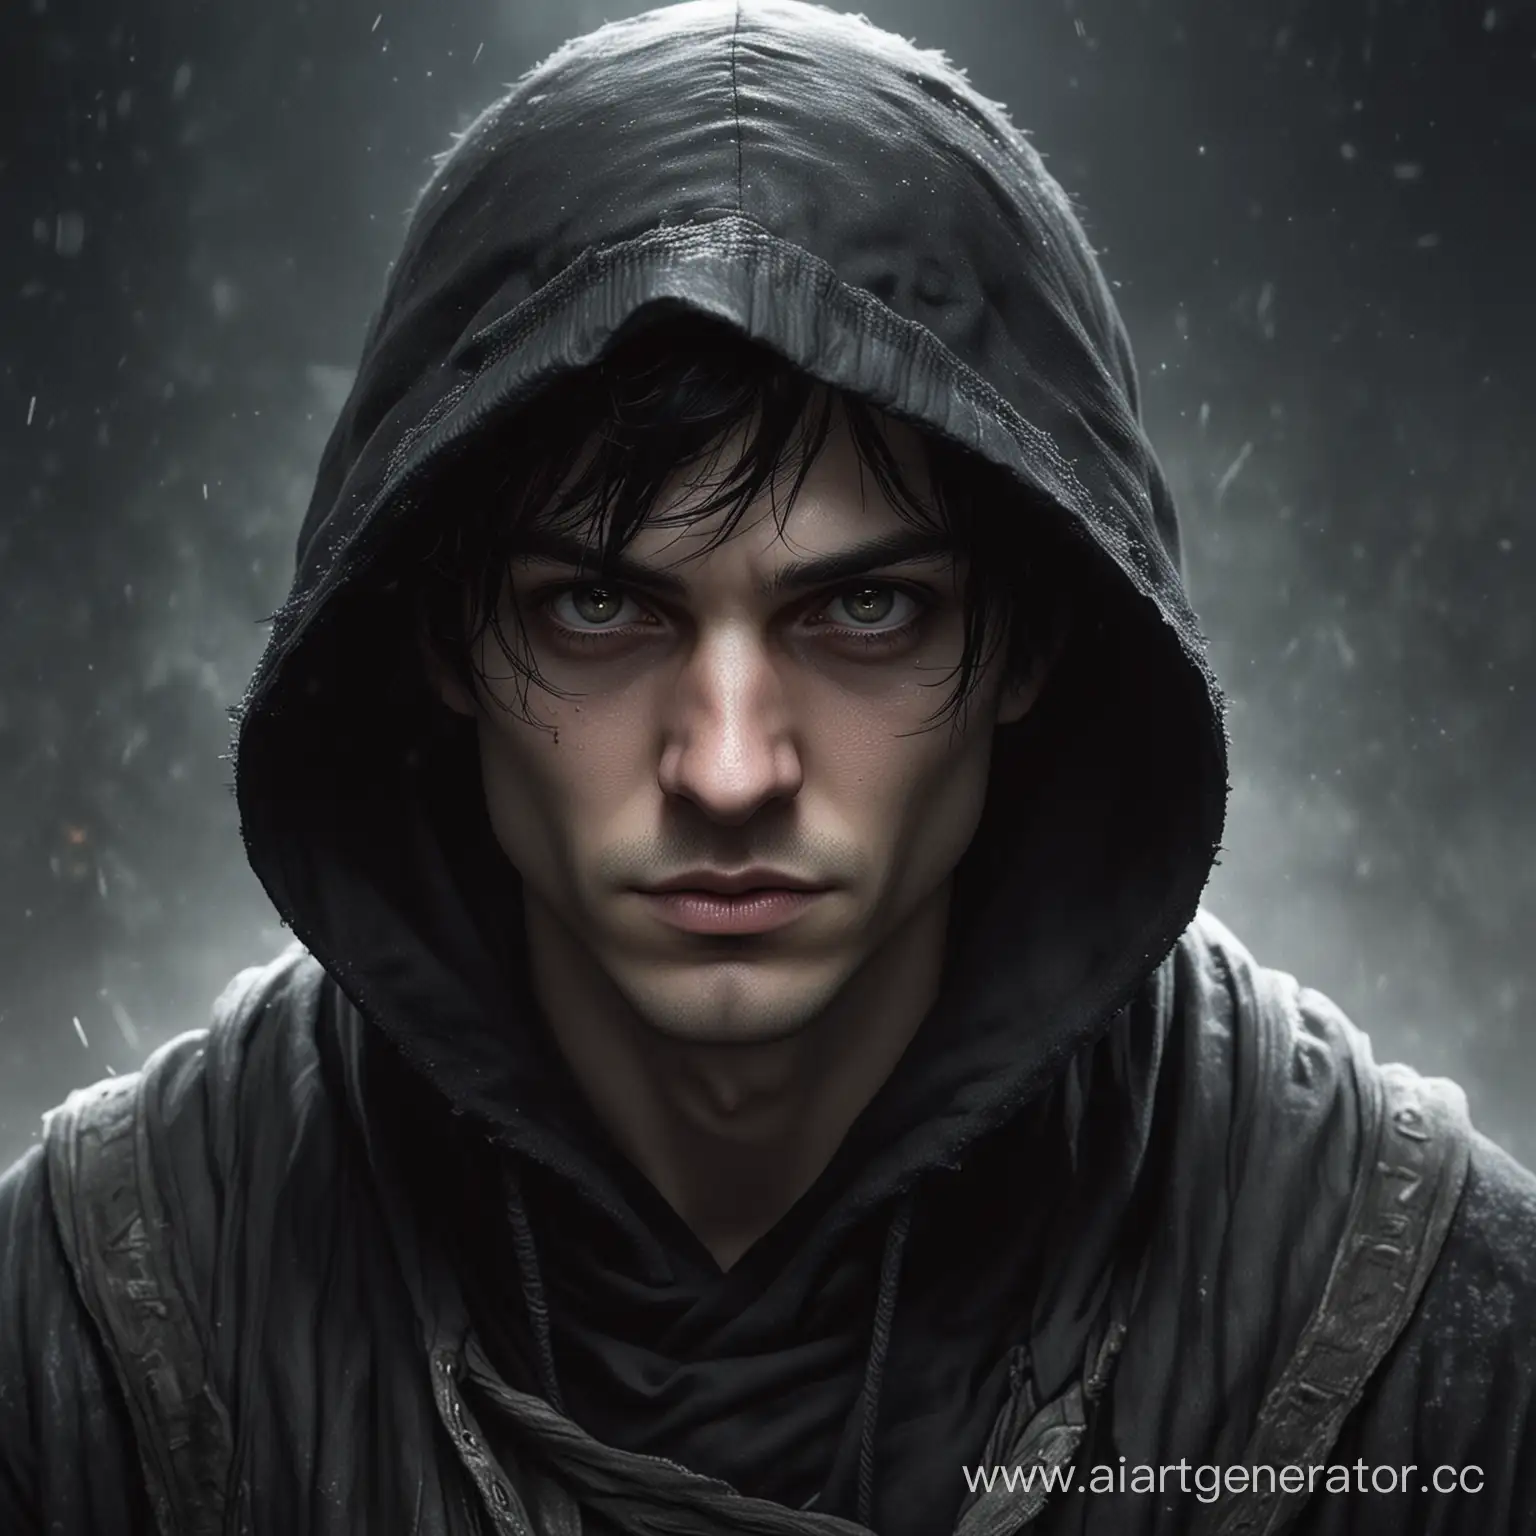 Mysterious-Mage-with-Pale-Skin-Gray-Eyes-and-Hooded-Attire